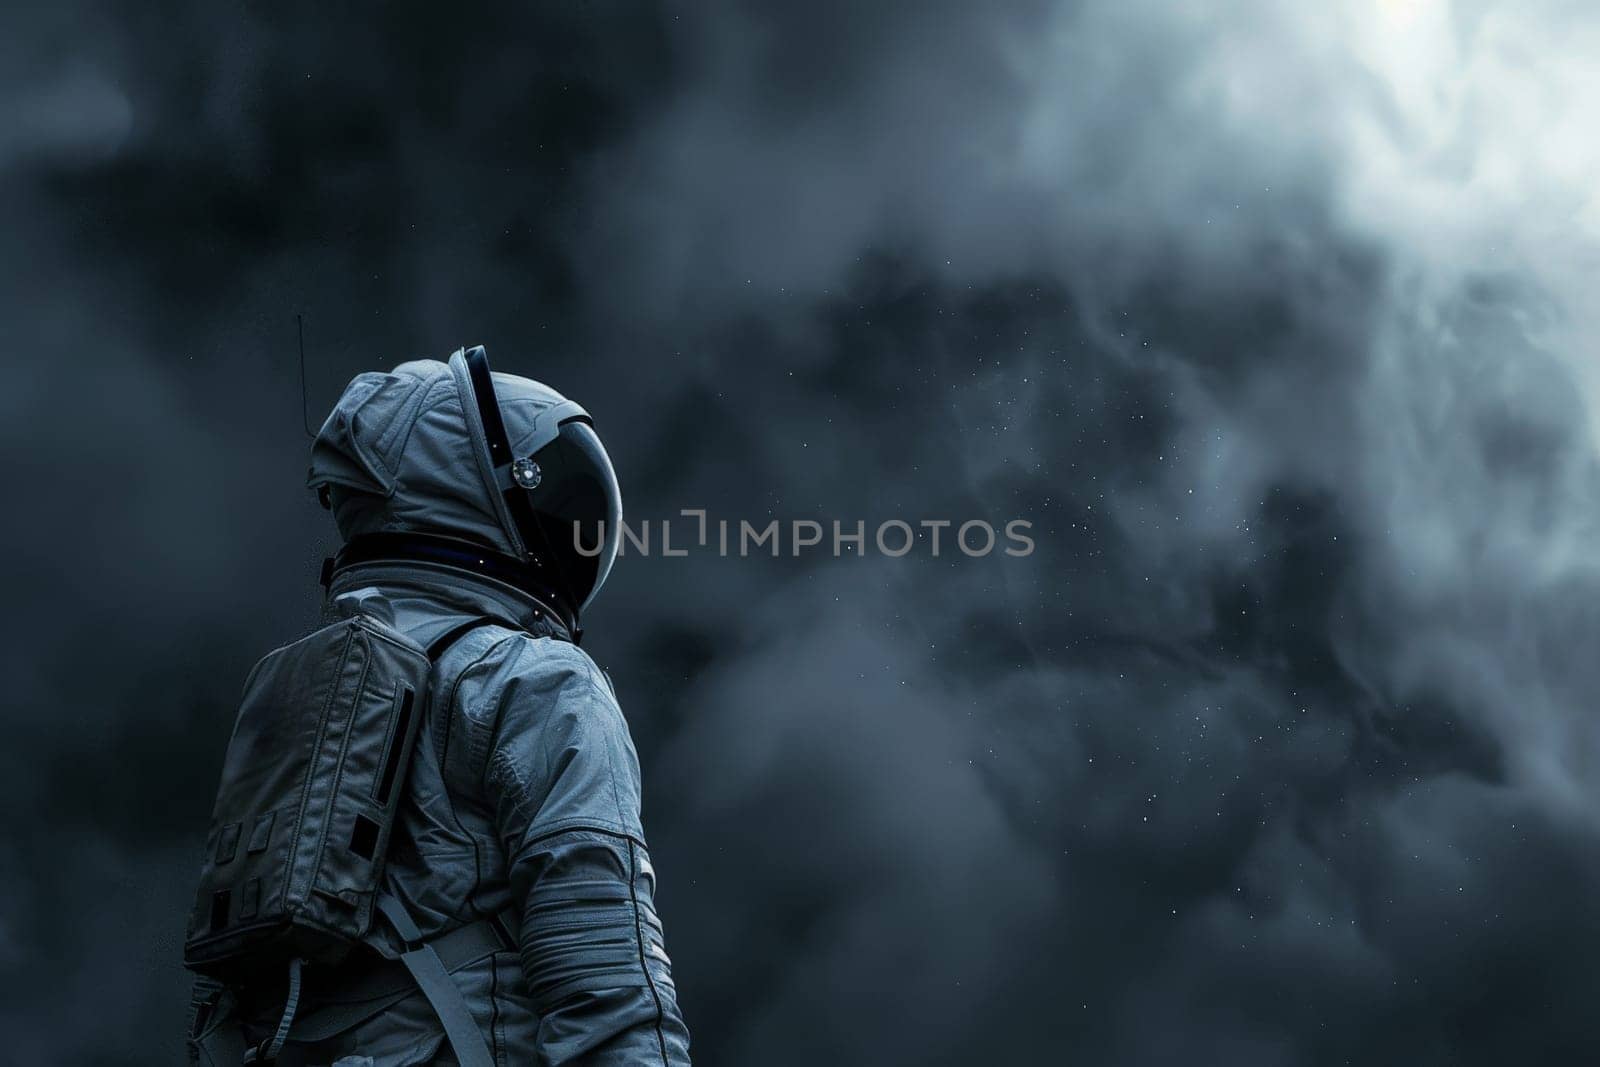 A man in a space suit is standing in front of a dark sky with clouds by nateemee